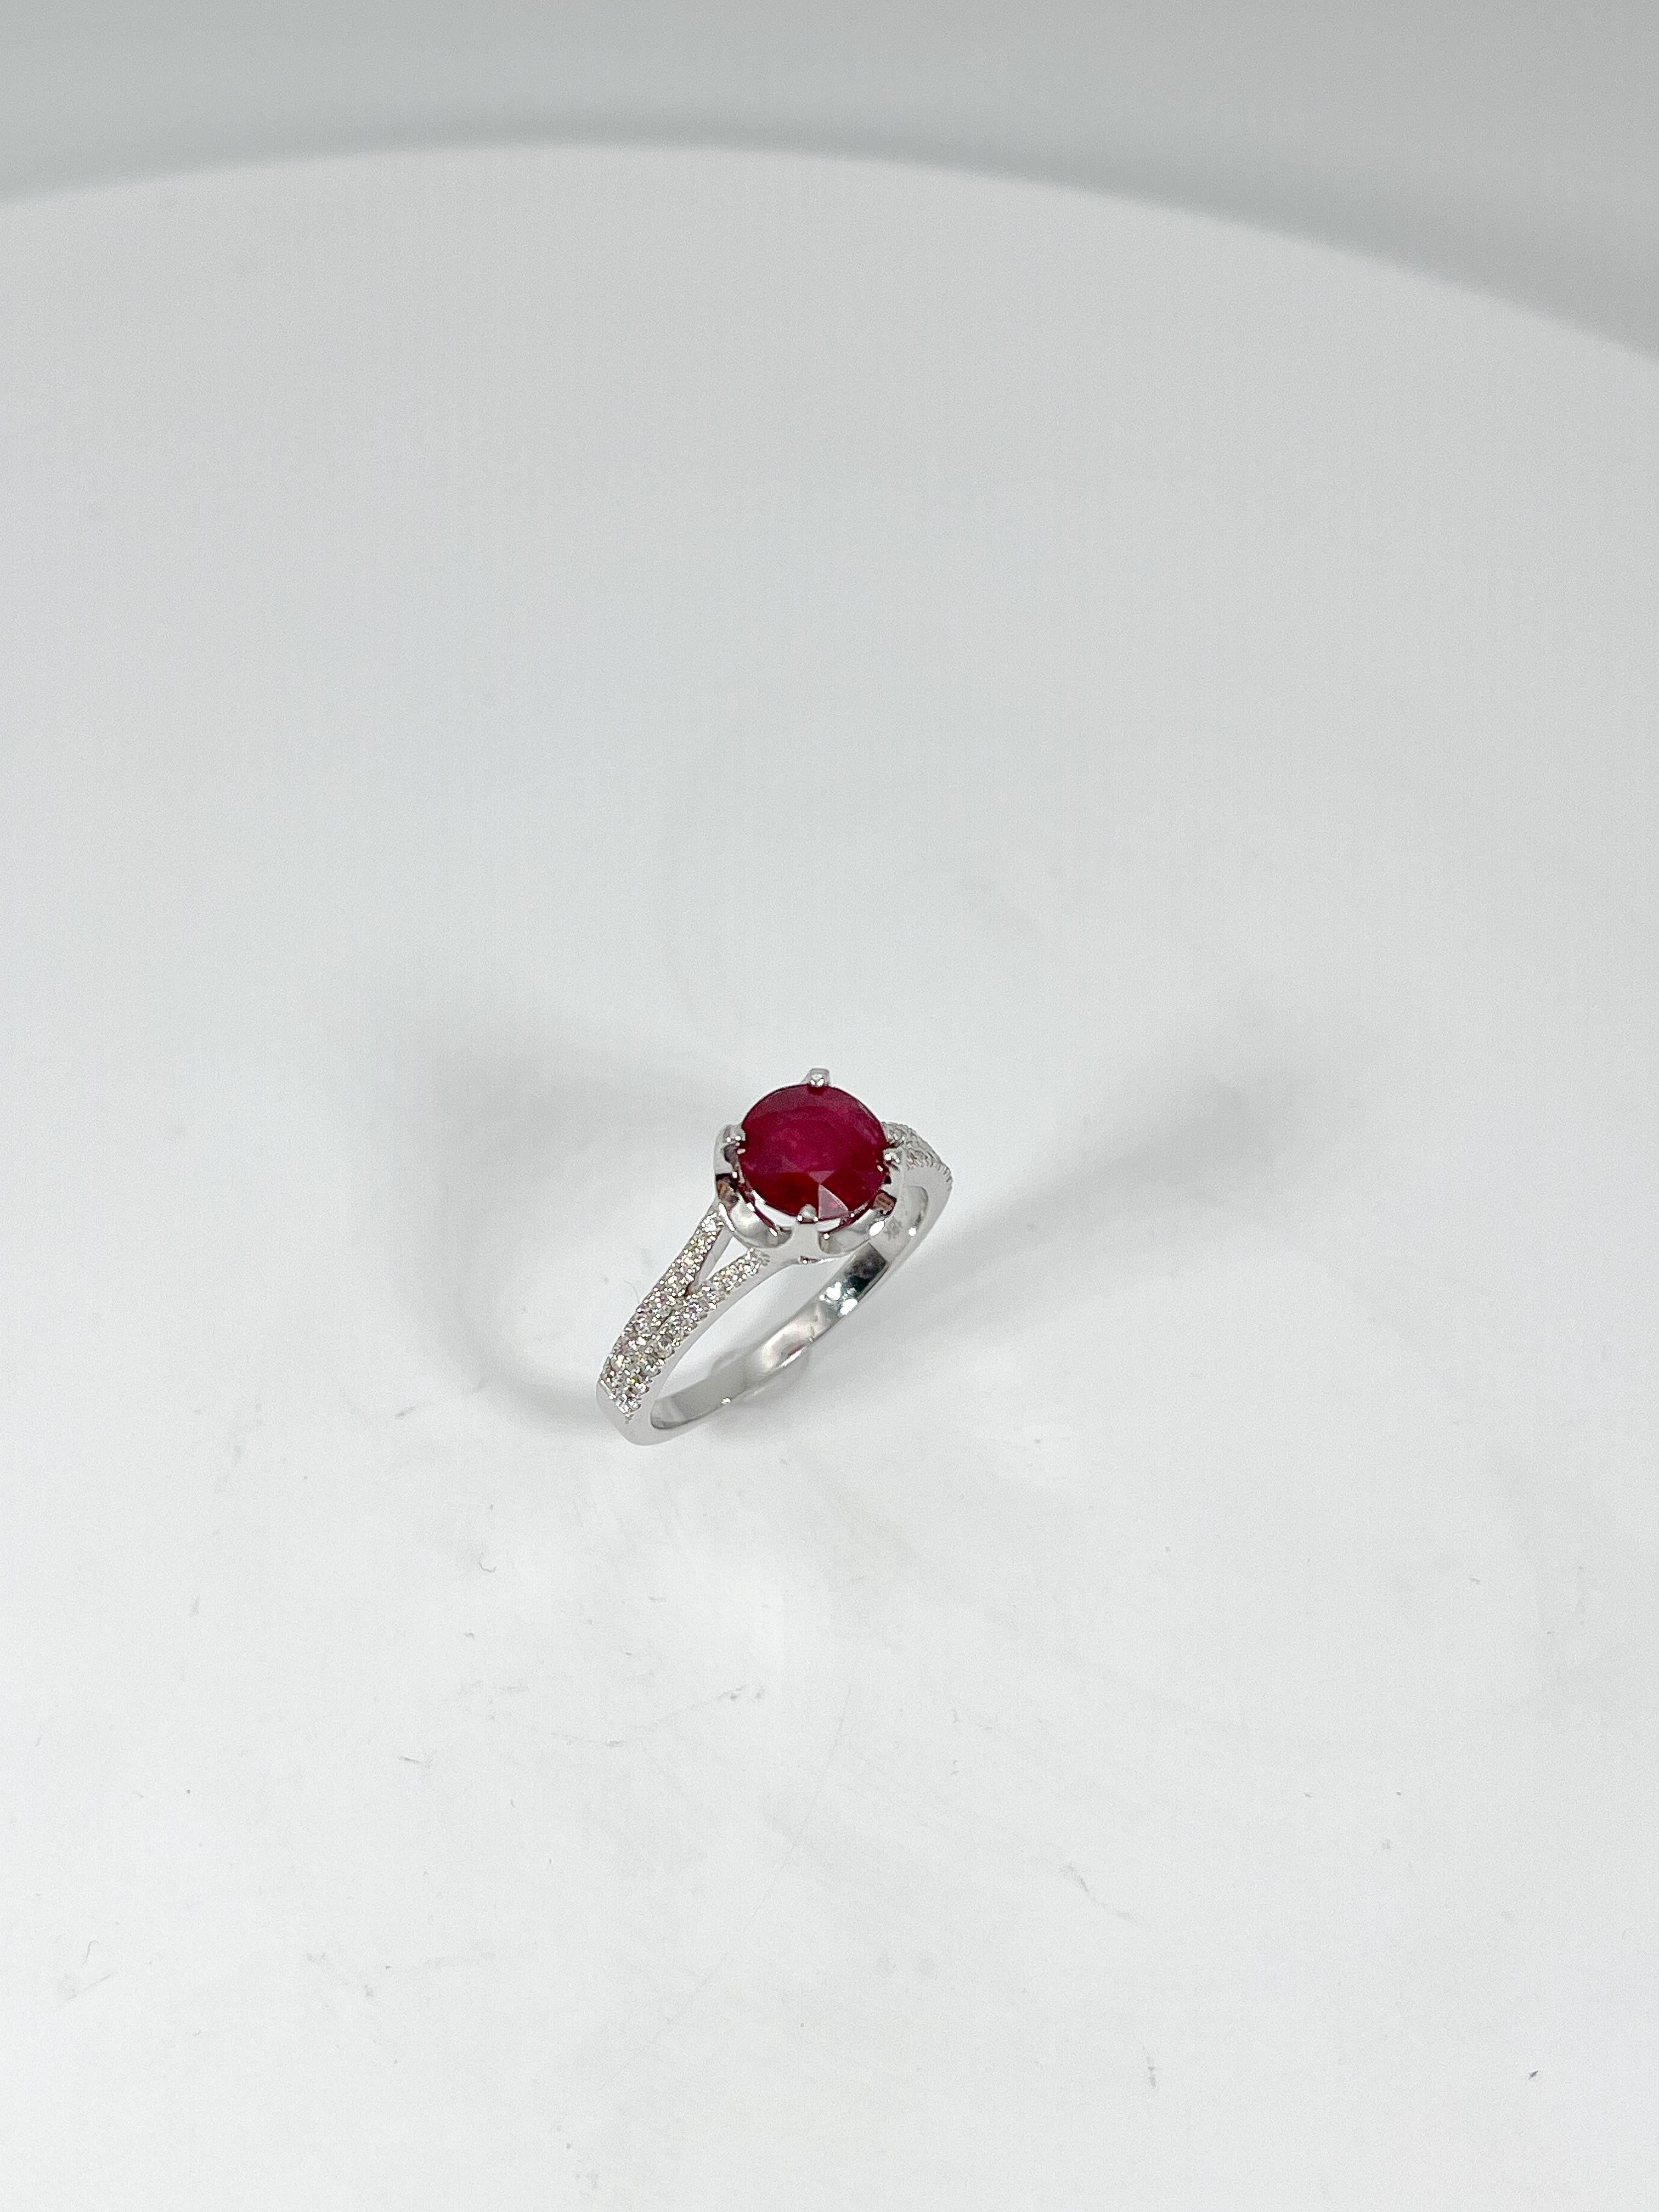 18k white gold allure split shank ring with a round 1.84 carat ruby center stone. Ring has round diamond .16 CTW side stones that go halfway down the shank. Ring is a size 6 1/4 and has a weigh of 3.9 grams.